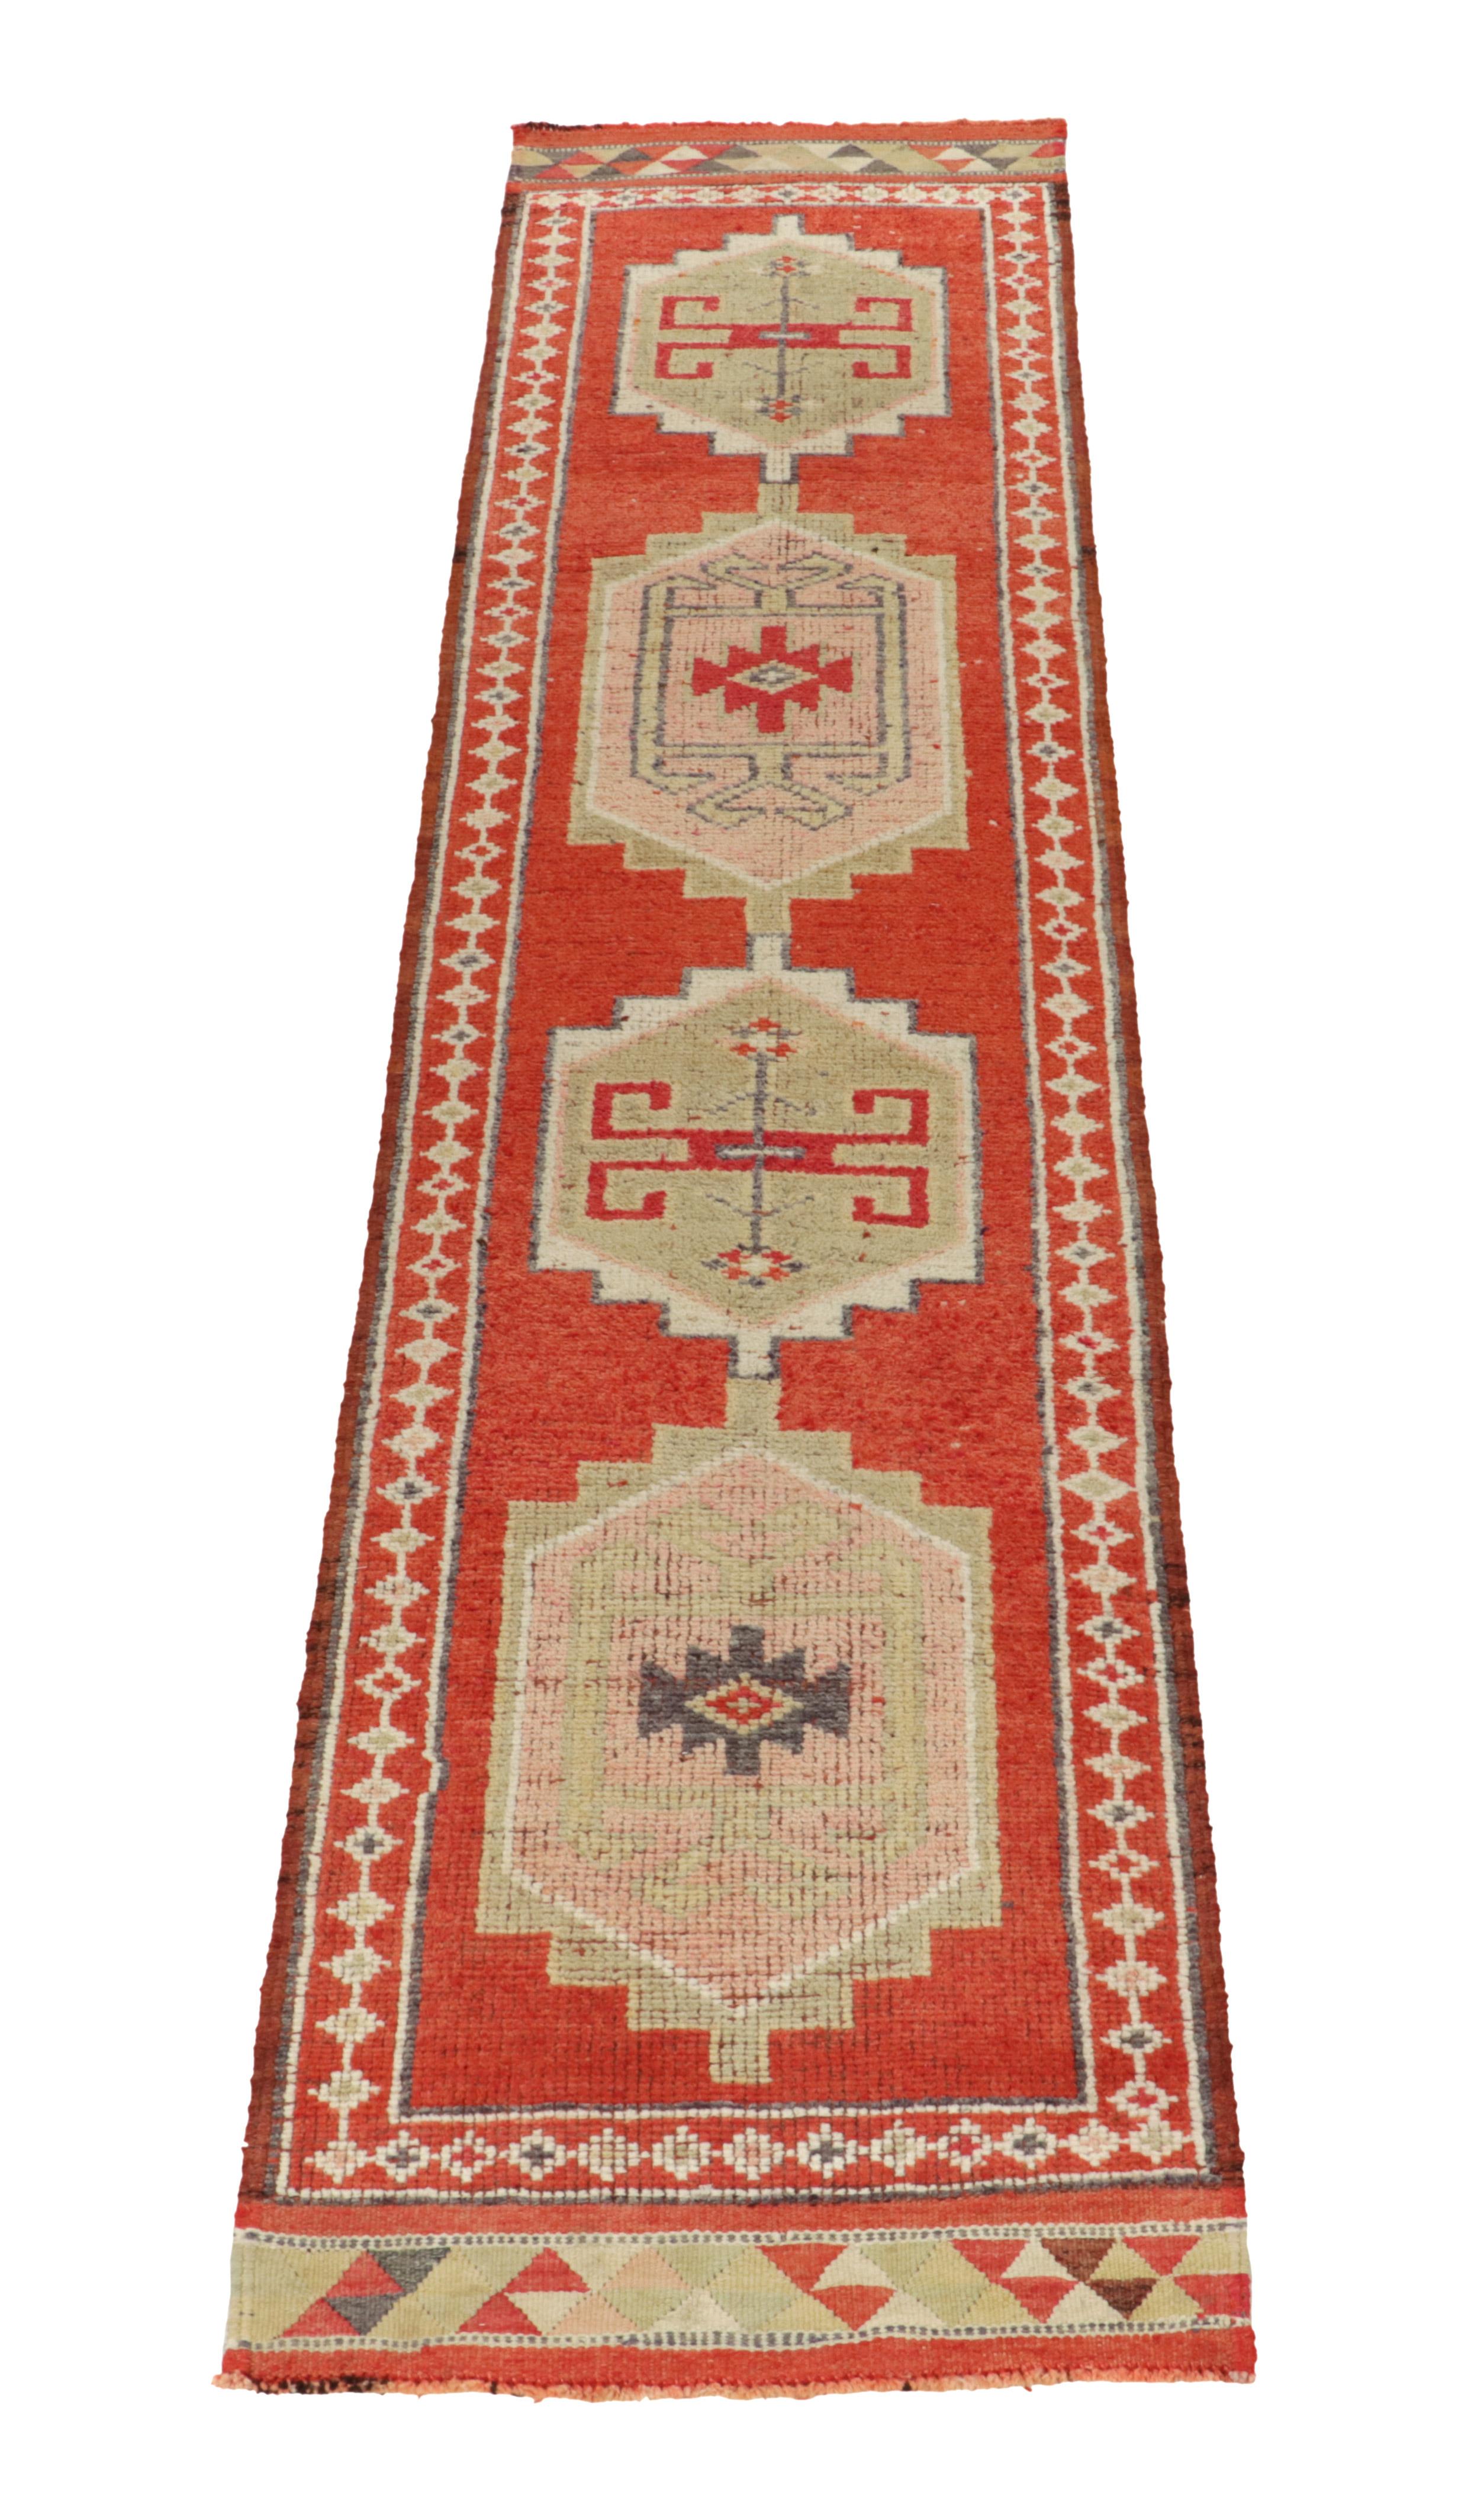 Hand-knotted in wool, a vintage 3x12 runner from Rug & Kilim’s coveted new curation of rare tribal rugs.

Originating from Turkey circa 1950-1960, the design enjoys traditional motifs in more transitional, yet rich tones of carrot red, pink, beige